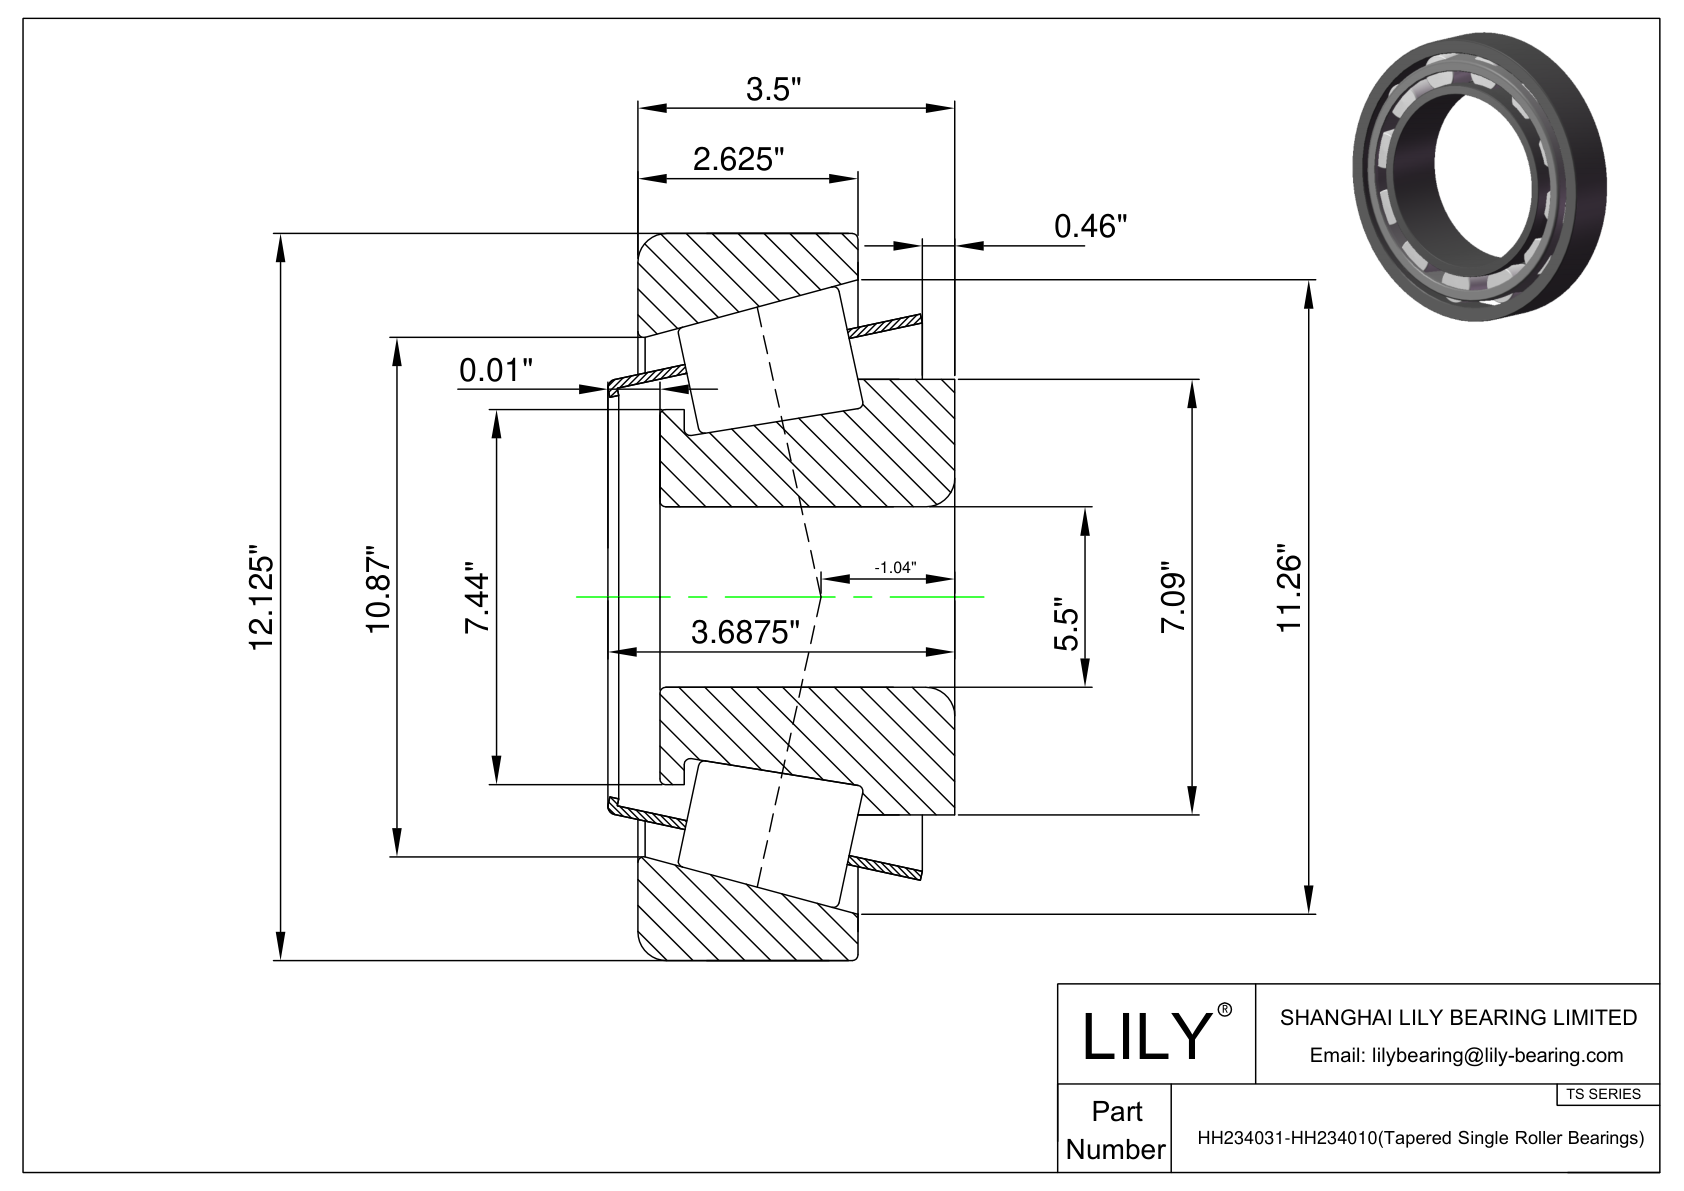 HH234031-HH234010 TS (Tapered Single Roller Bearings) (Imperial) cad drawing